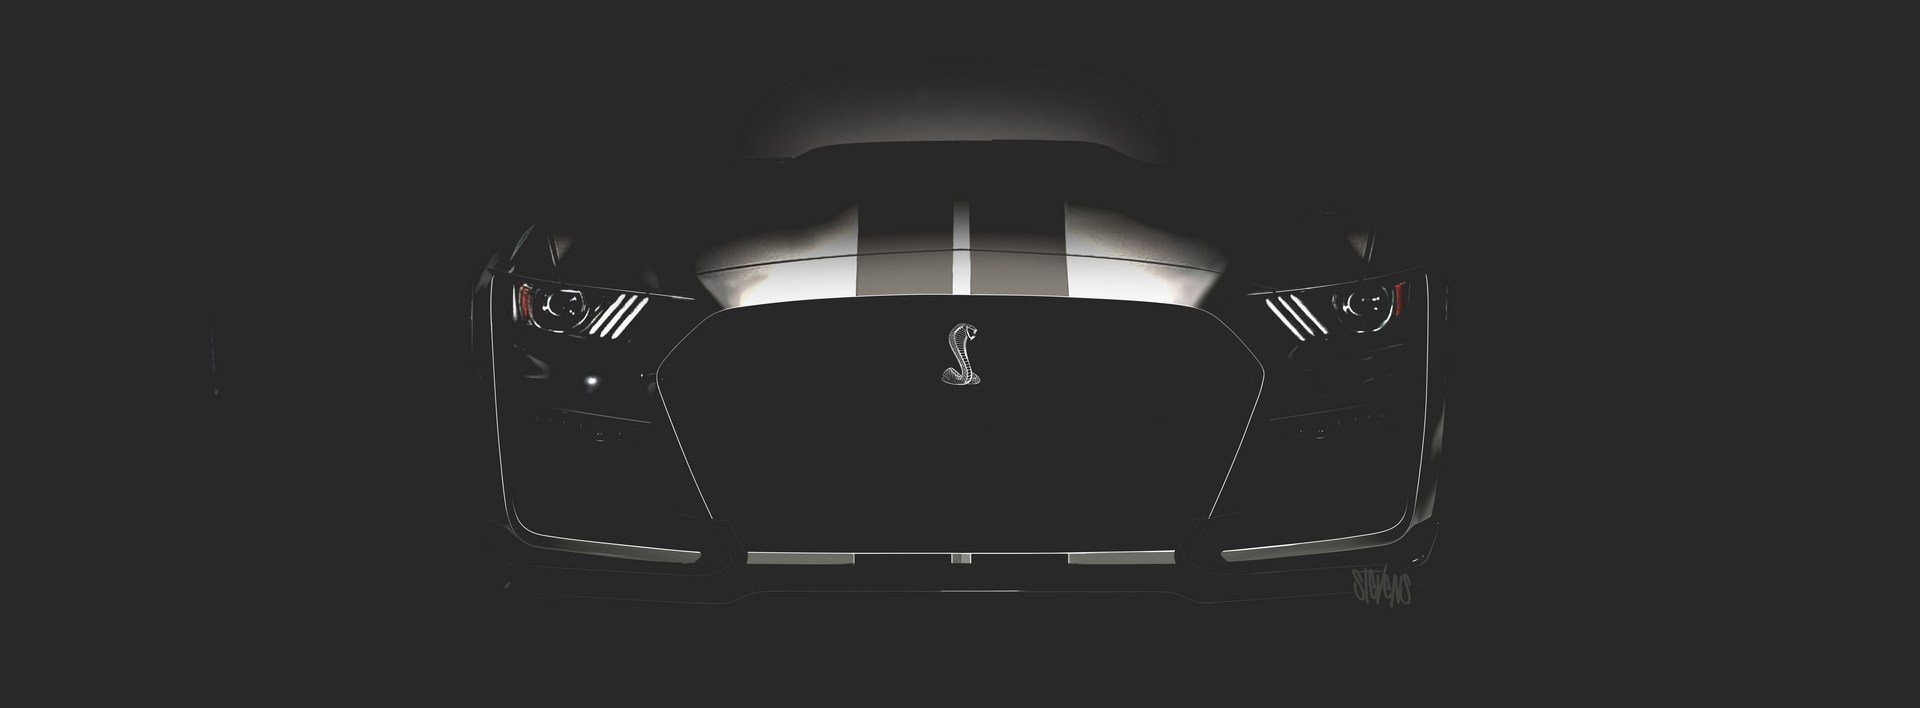 Mustang-Shelby-GT500-2020-mau-xe-Ford-manh-nhat-trong-lich-su-anh-2